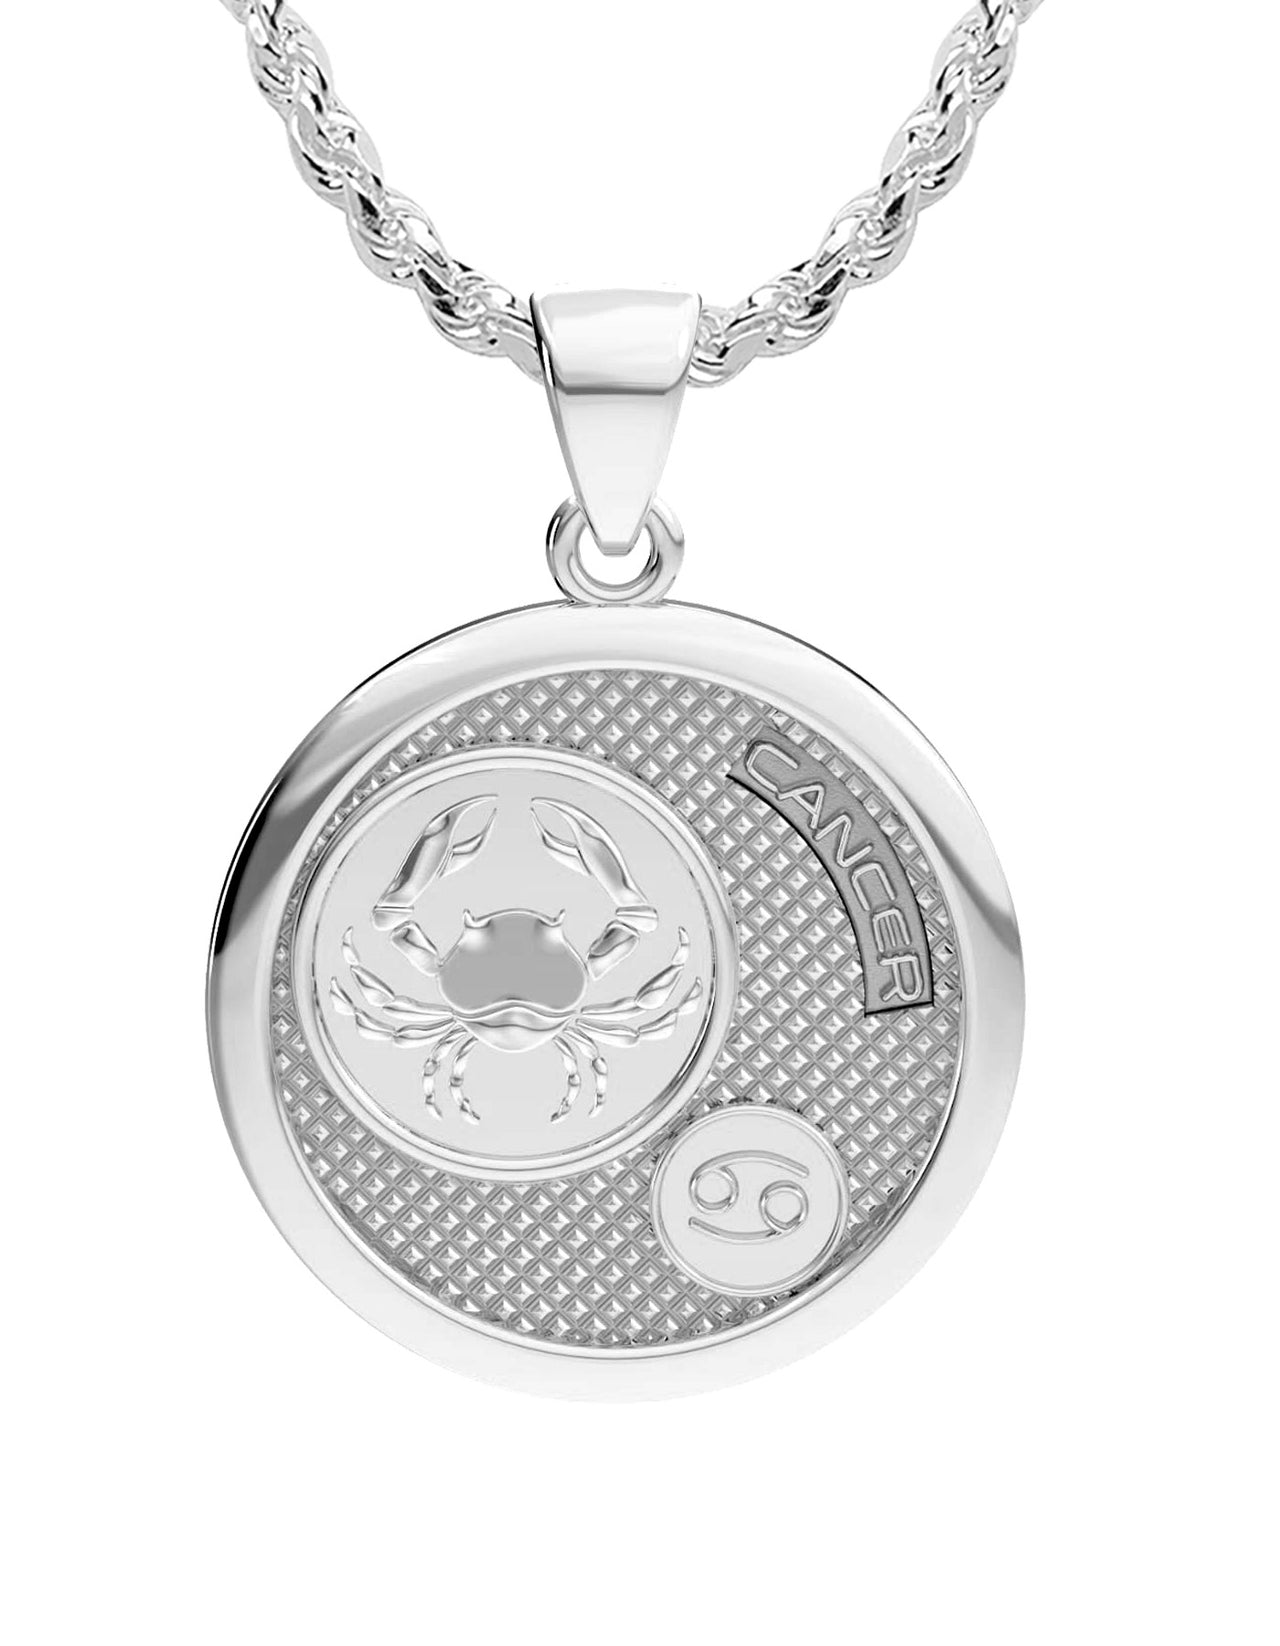 Ladies 925 Sterling Silver Round Cancer Zodiac Polished Finish Pendant Necklace, 25mm